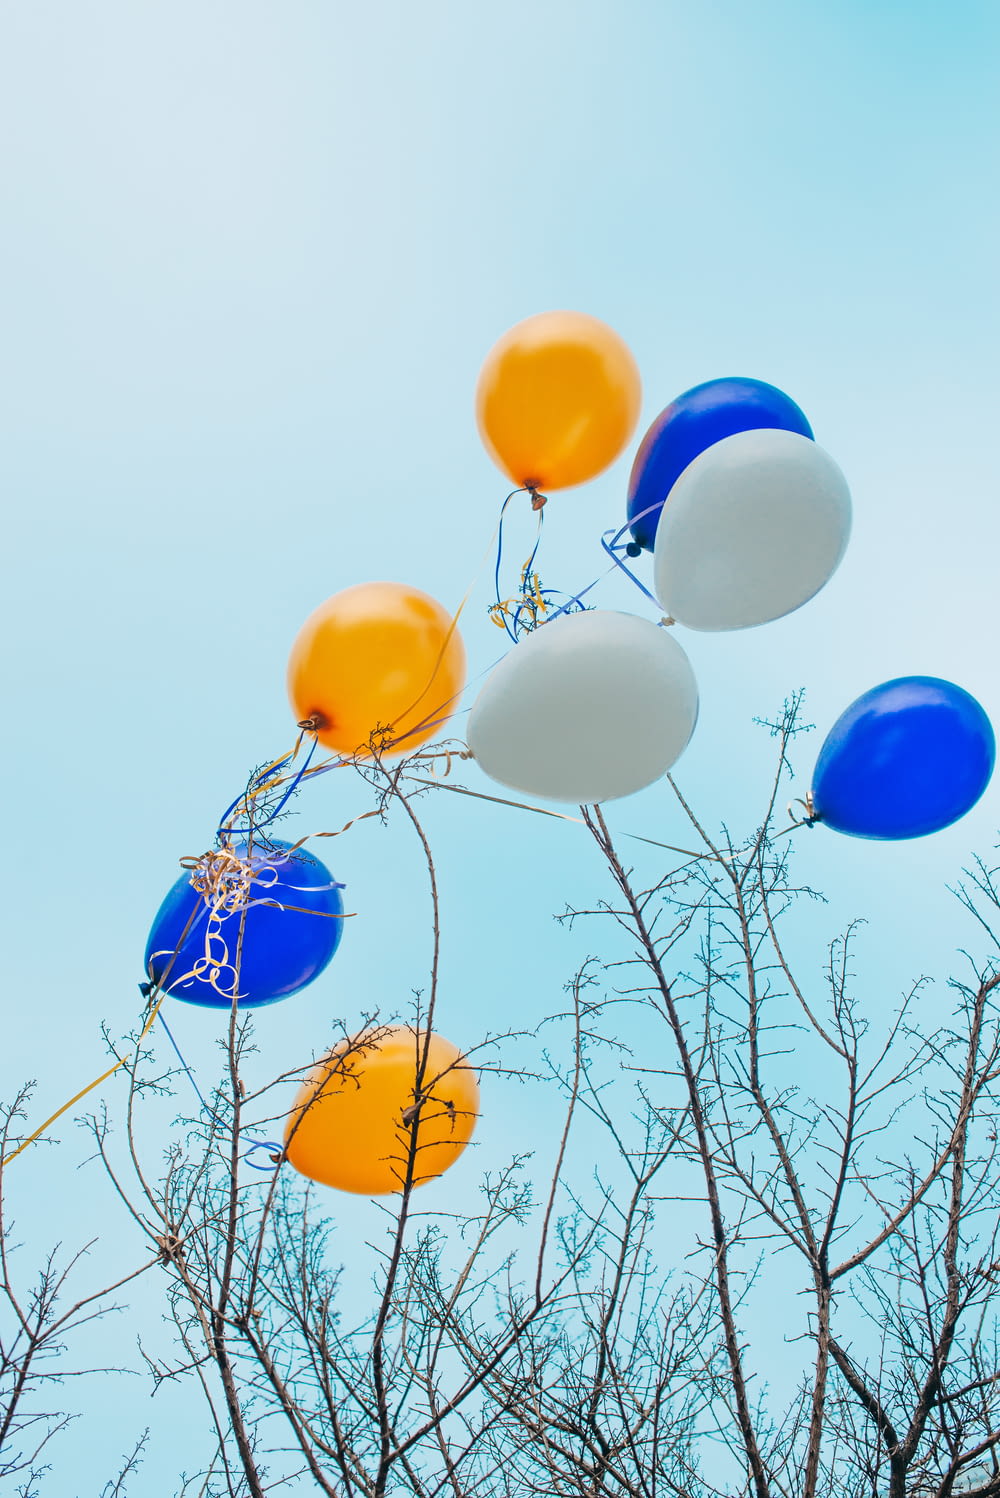 blue yellow and white balloons on bare tree during daytime